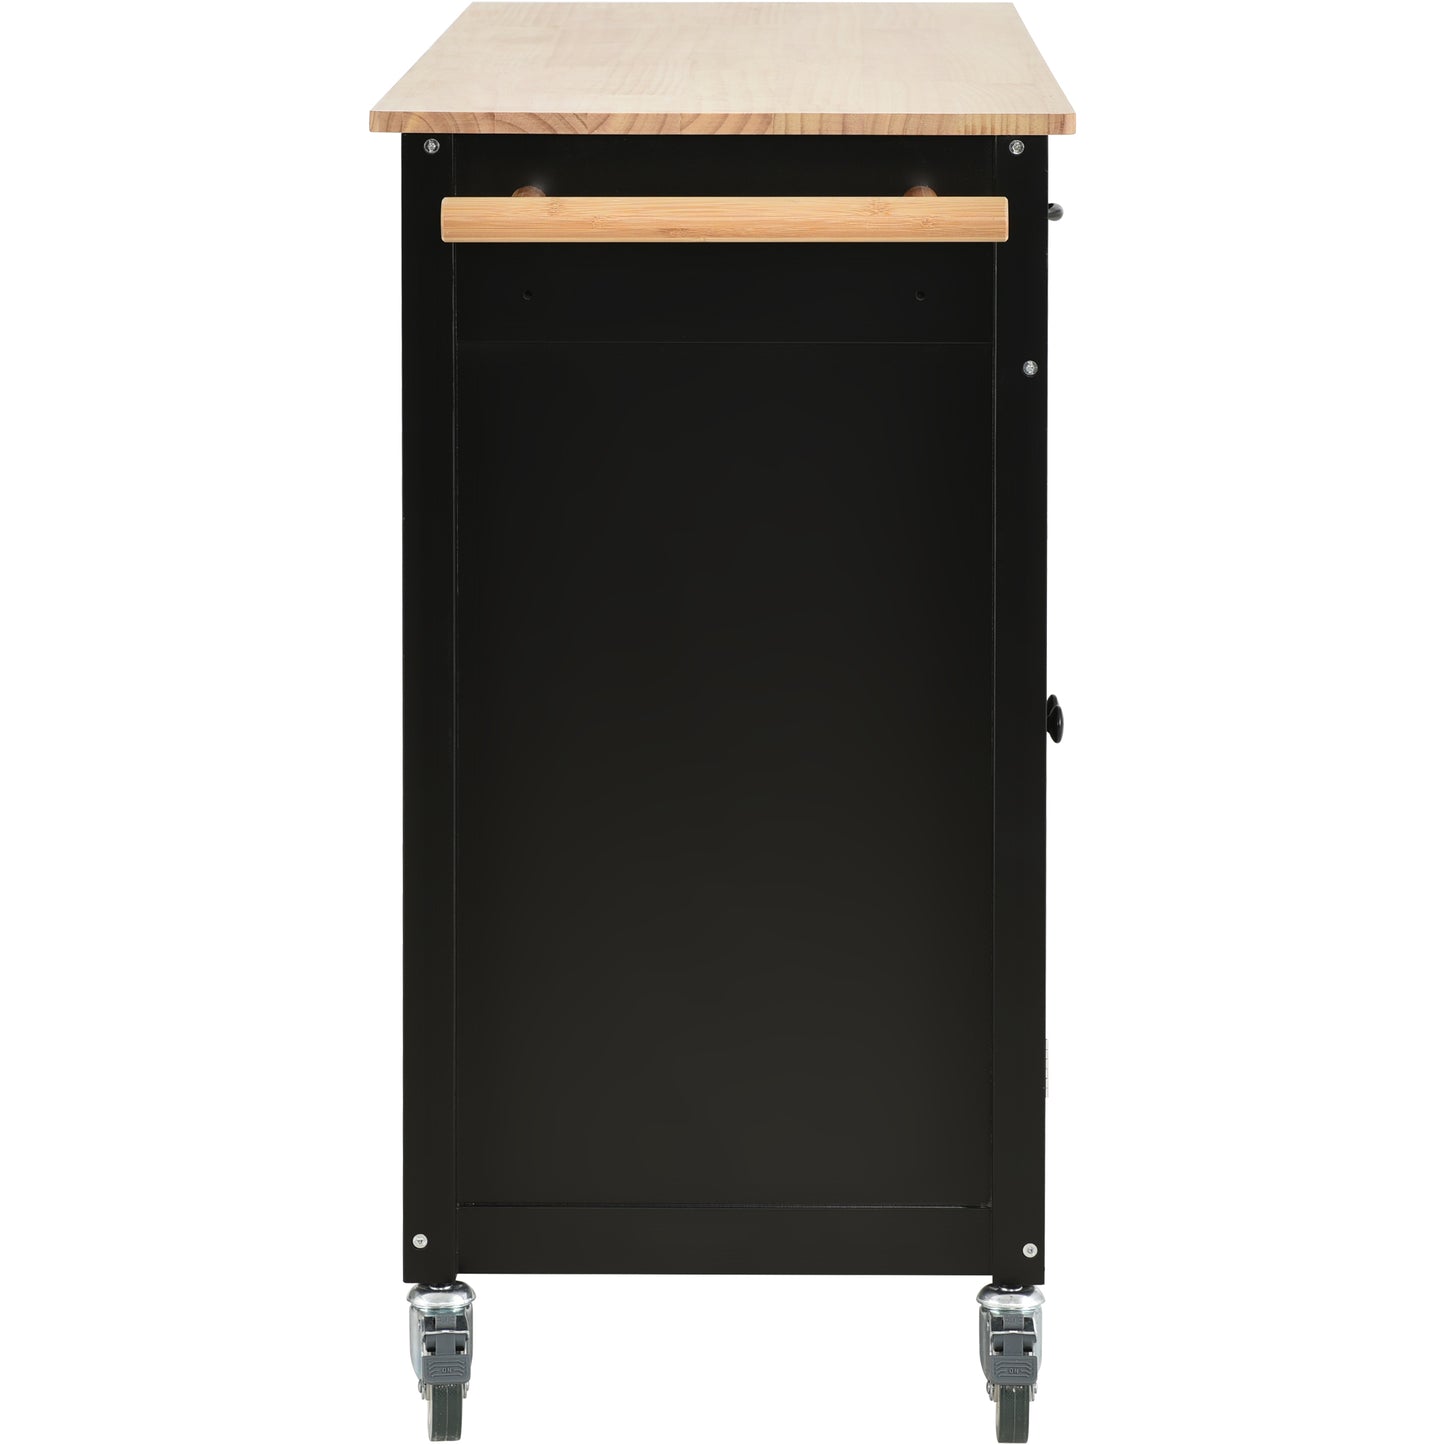 Kitchen Island Cart with Solid Wood Top and Locking Wheels,54.3 Inch Width,4 Door Cabinet and Two Drawers,Spice Rack, Towel Rack (Black)